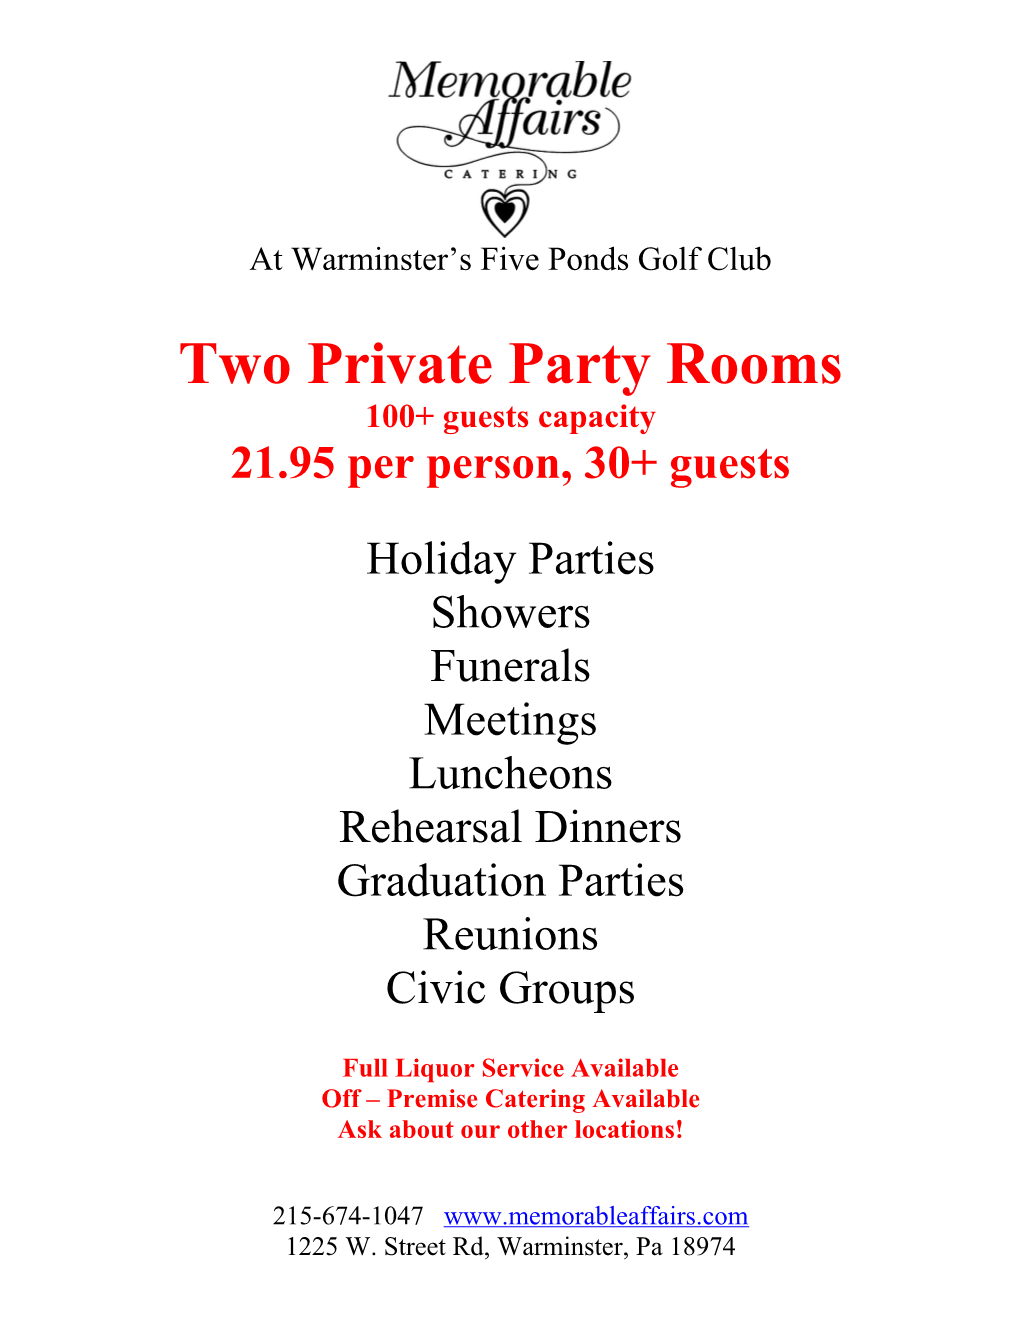 Two Private Party Rooms Overlooking the Golf Course